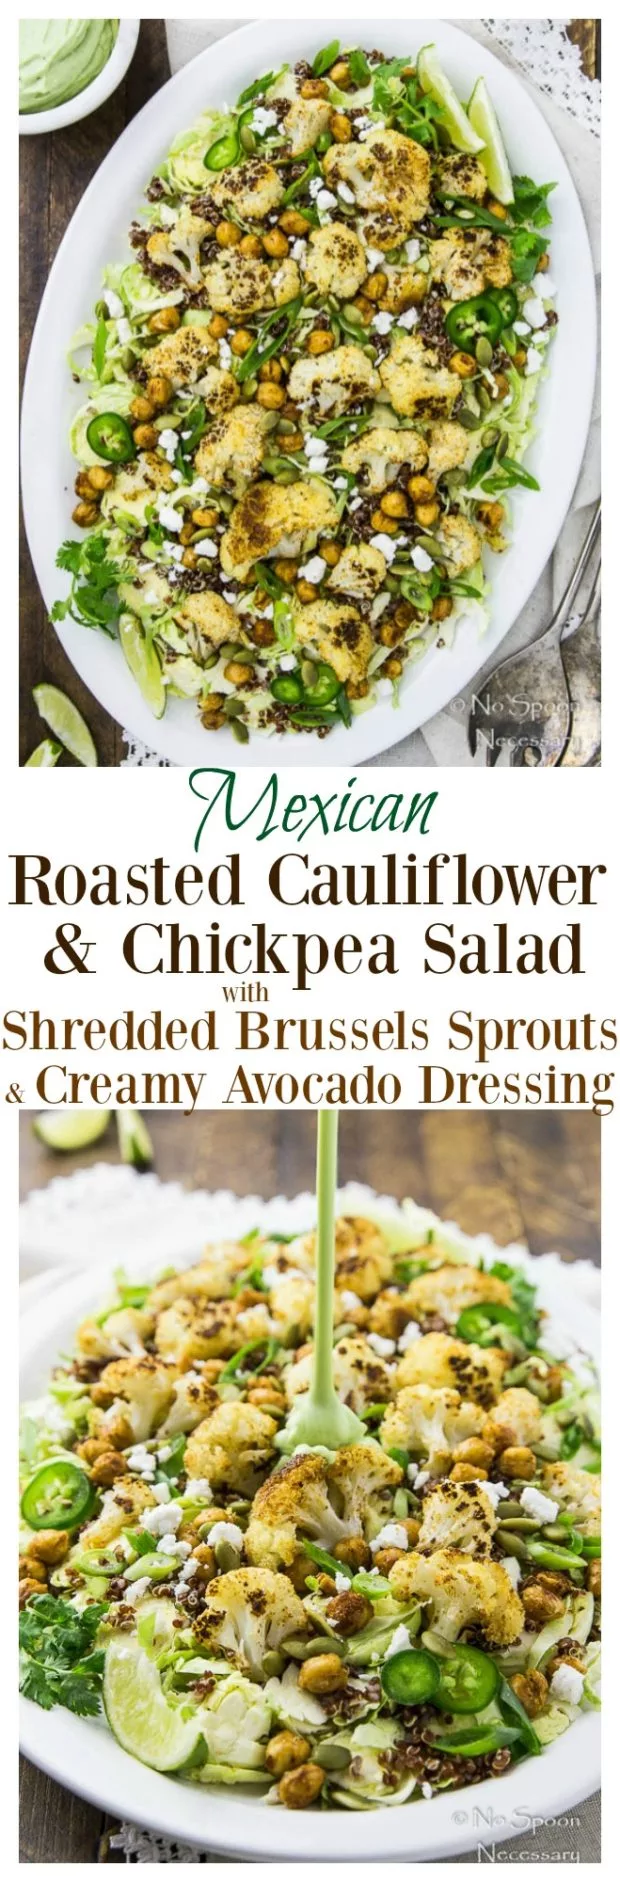 Mexican Roasted Cauliflower & Chickpea Salad with Shredded Brussels Sprouts & Creamy Avocado Dressing #Vegetarian #Healthy